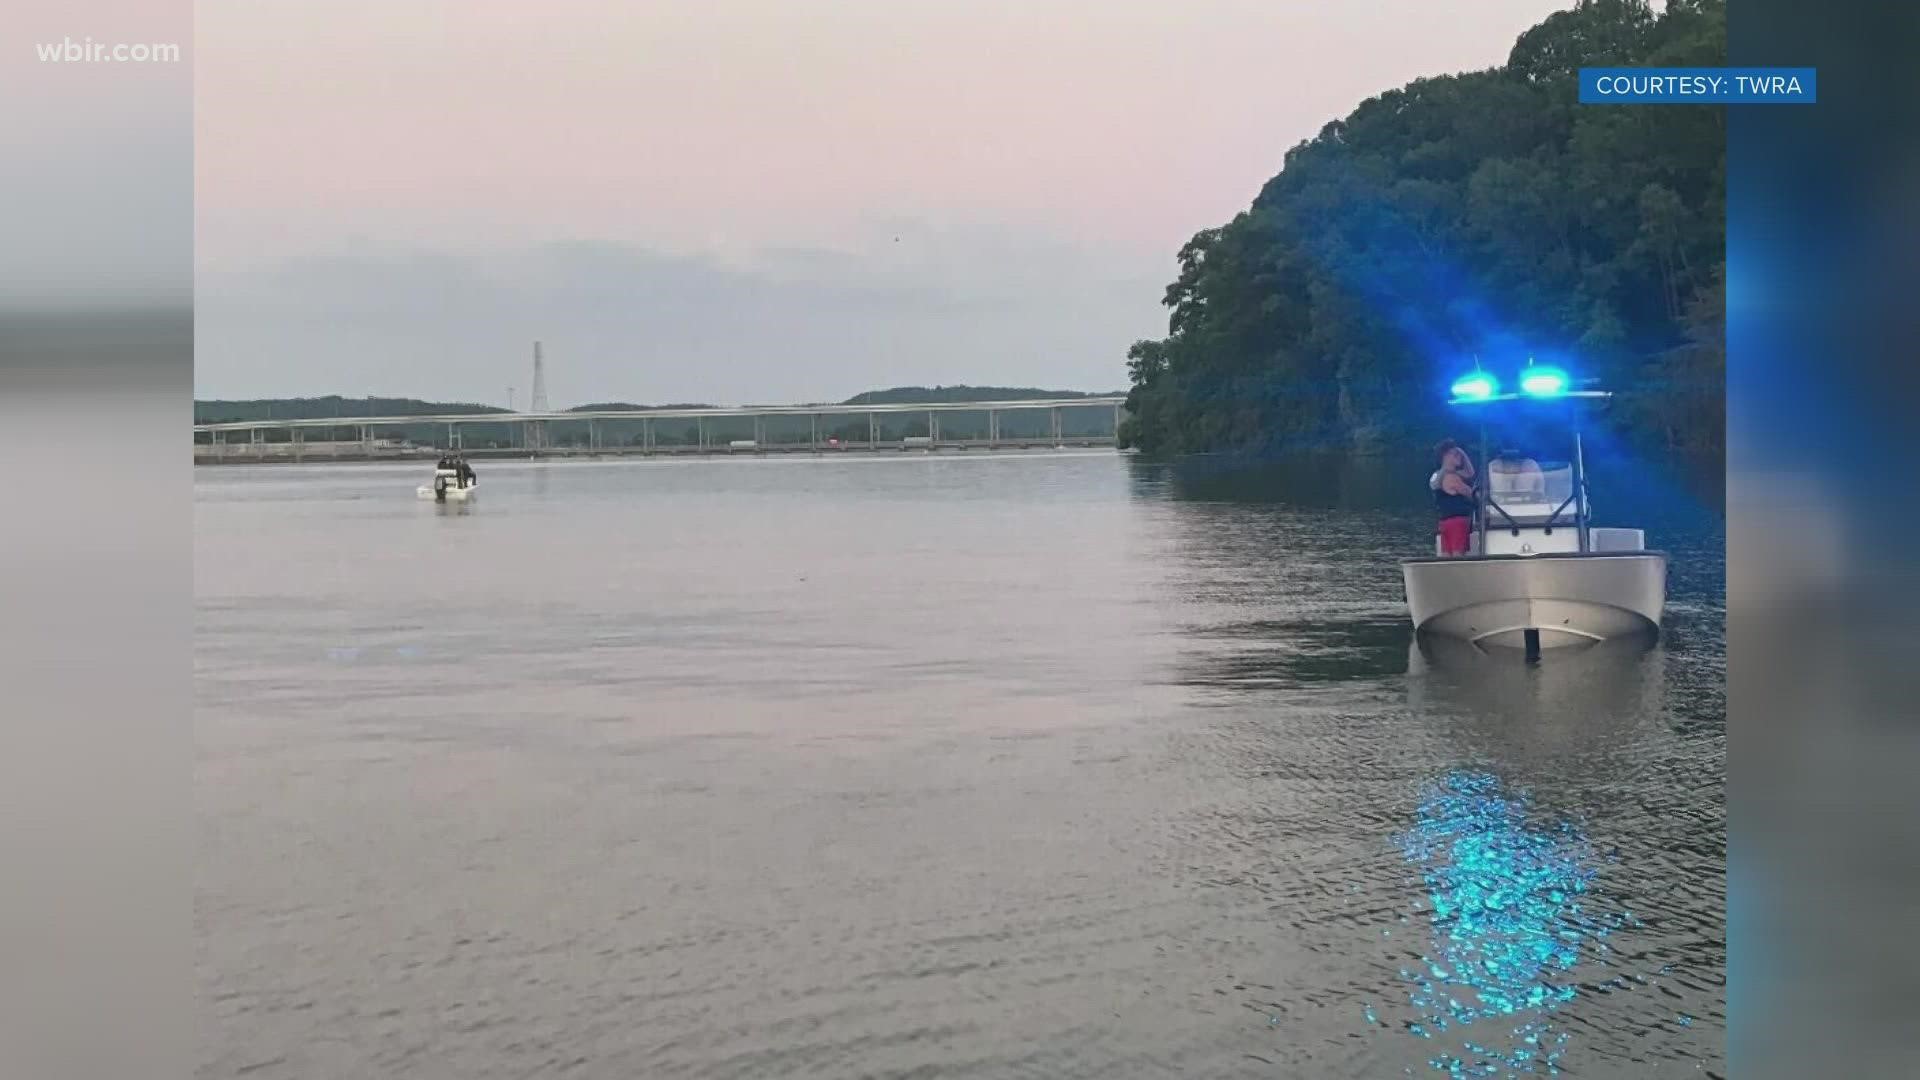 The body of a 19-year-old Rhea County woman was recovered from Watts Bar Lake, according to the Tennessee Wildlife Resources Agency.